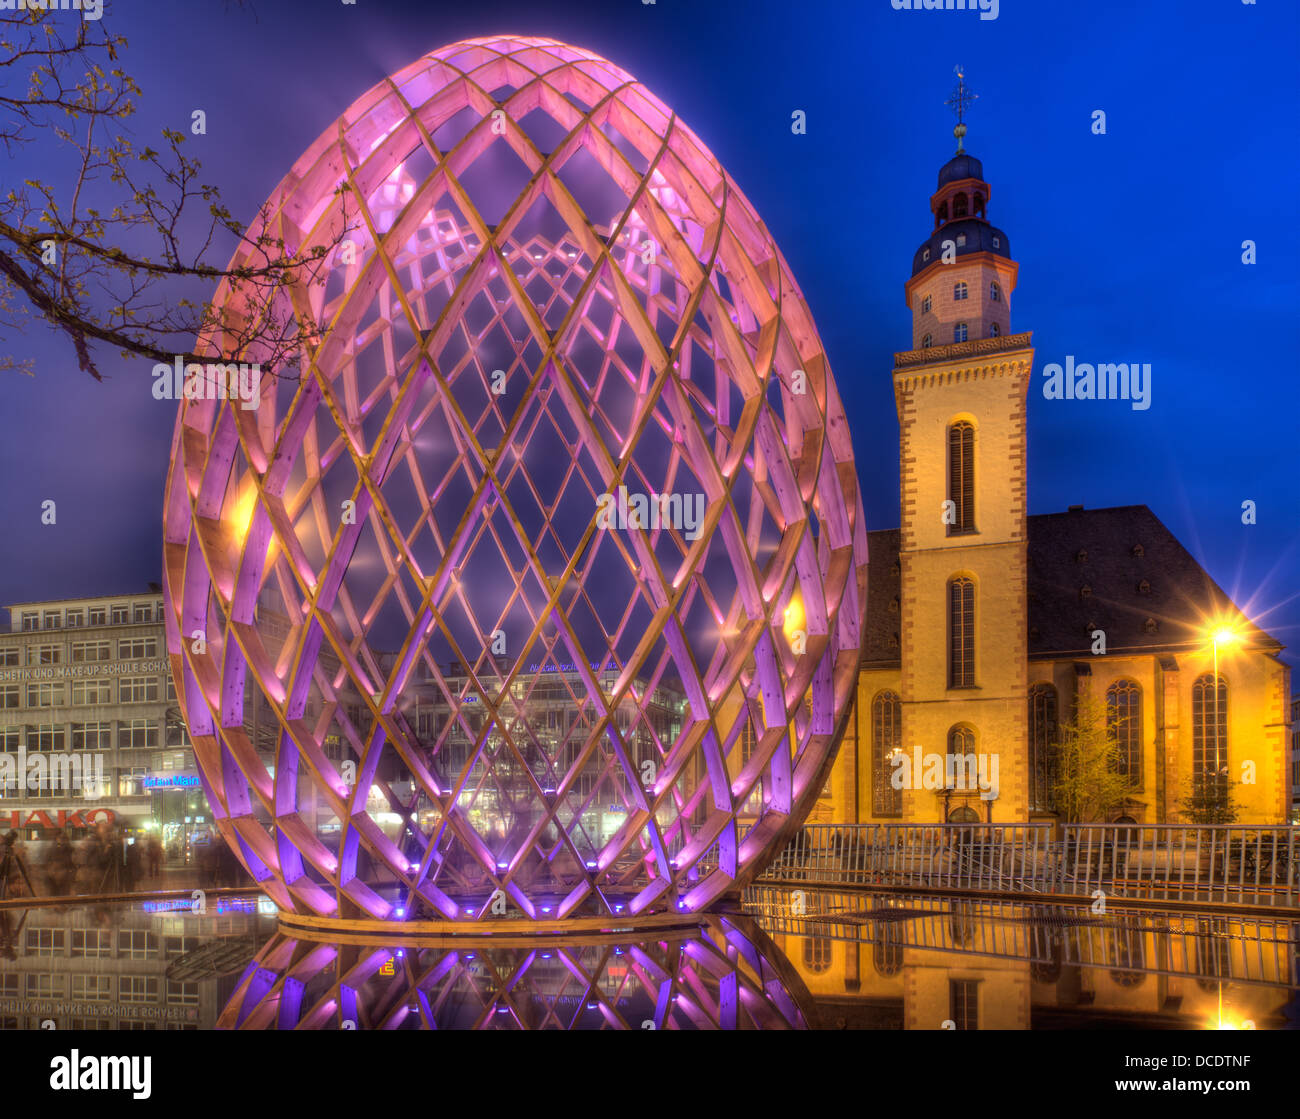 An egg lit up at night in Frankfurt, Germany. Stock Photo